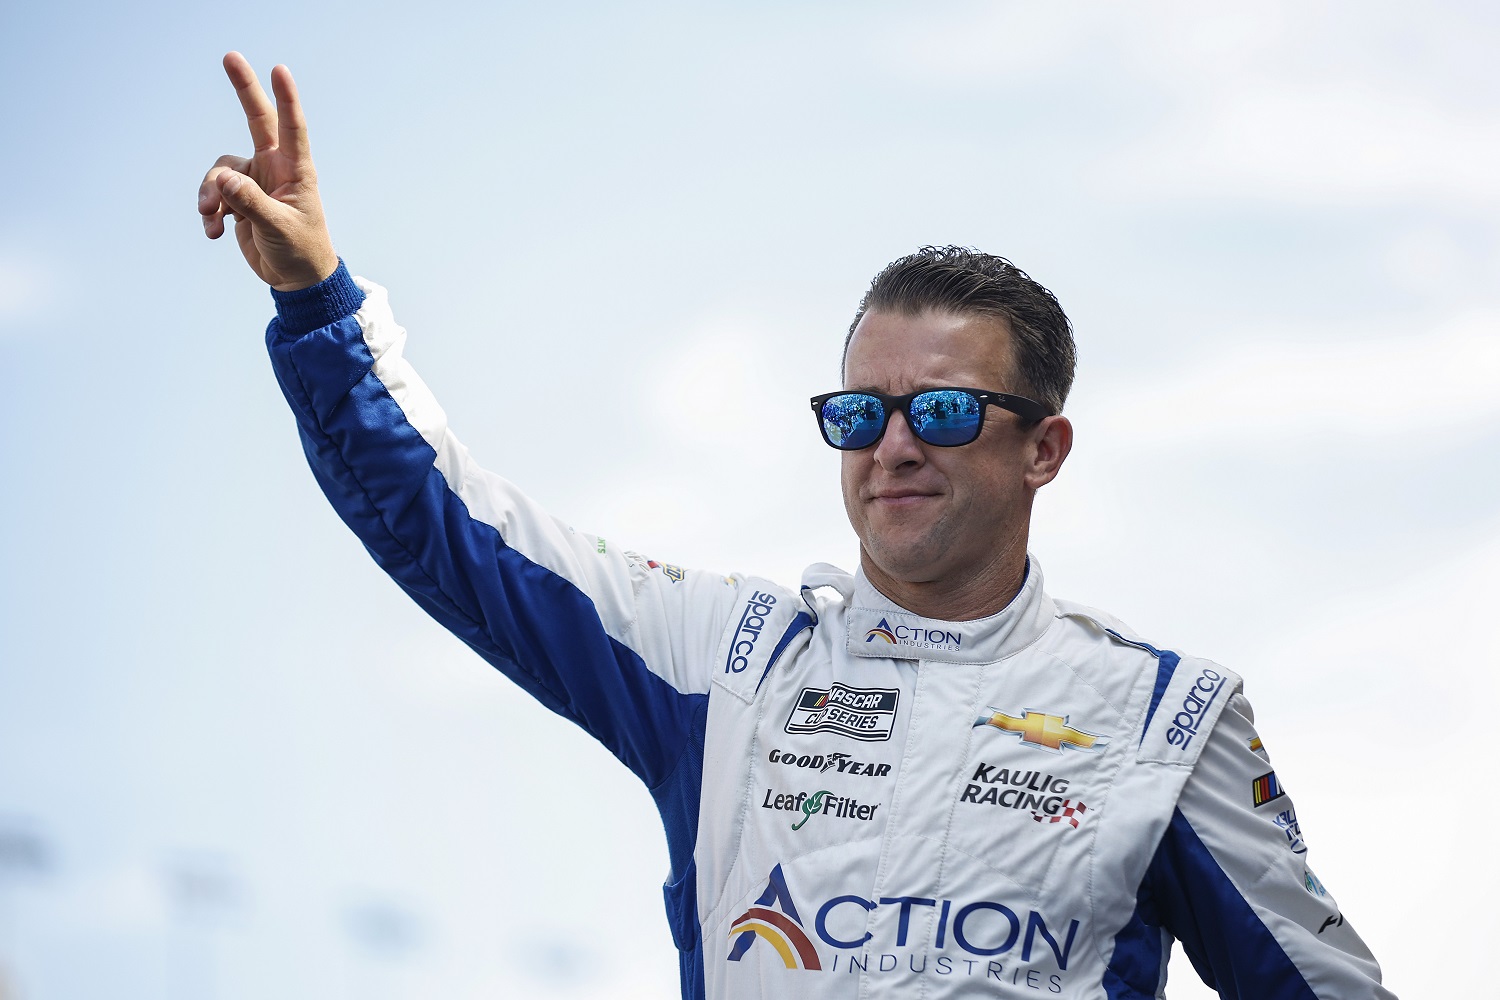 AJ Allmendinger waves to fans as he walks onstage during driver intros for the NASCAR Cup Series South Point 400 at Las Vegas Motor Speedway on Oct. 16, 2022.